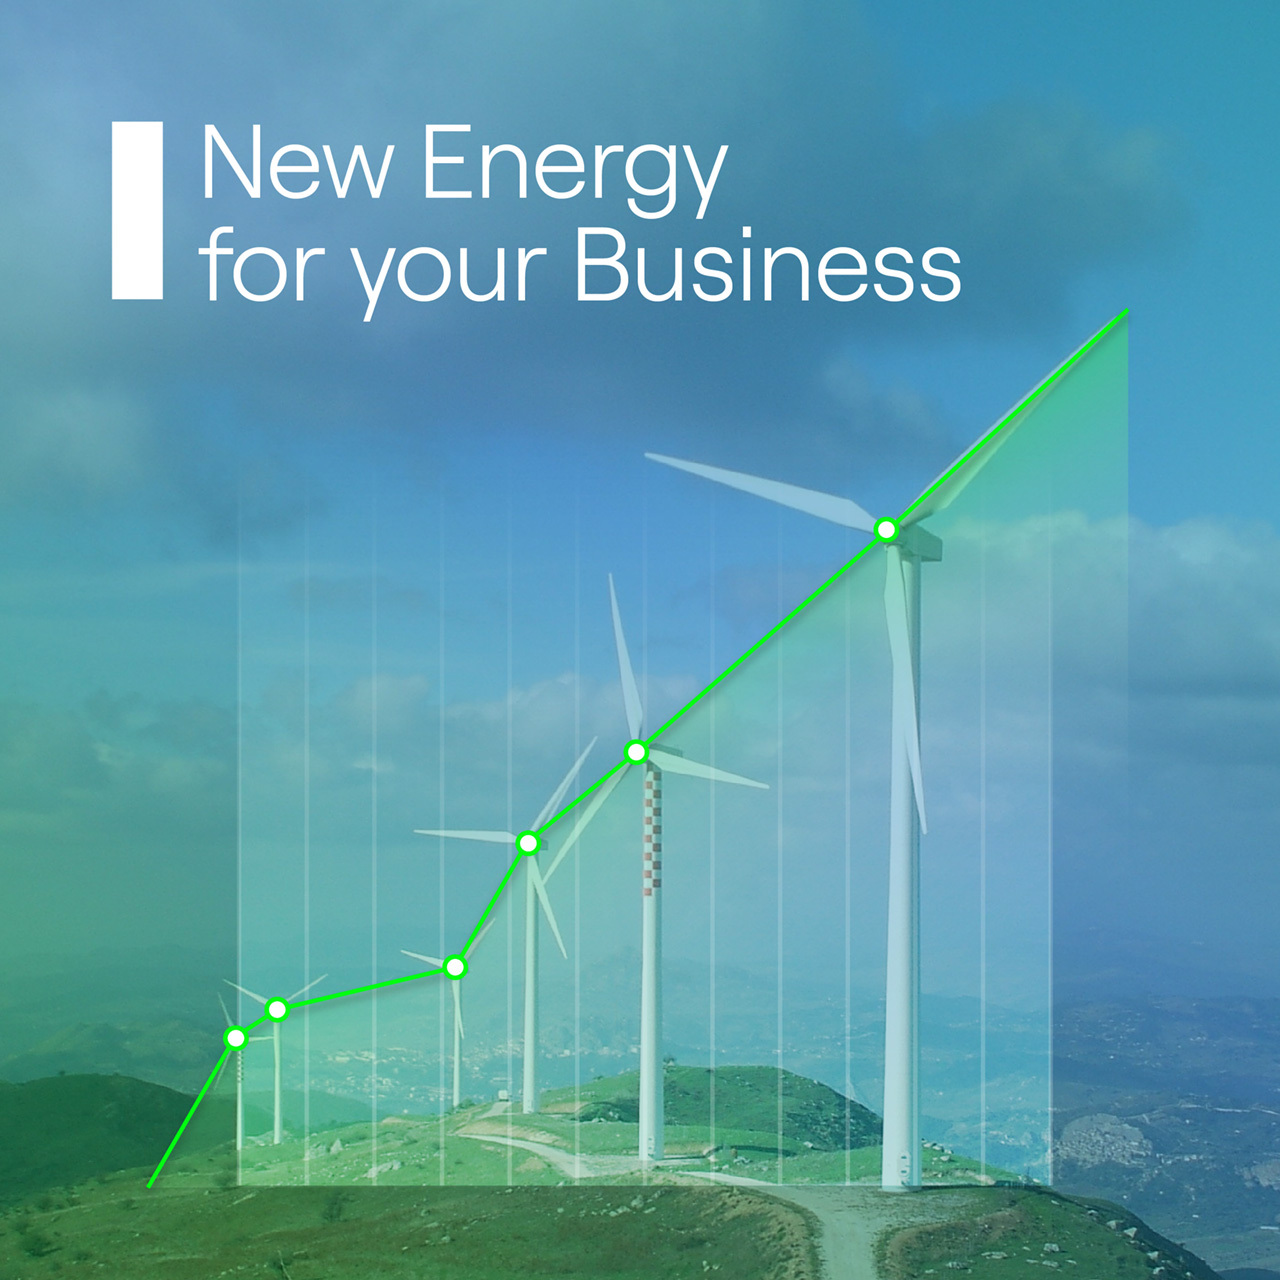 New energy for your business